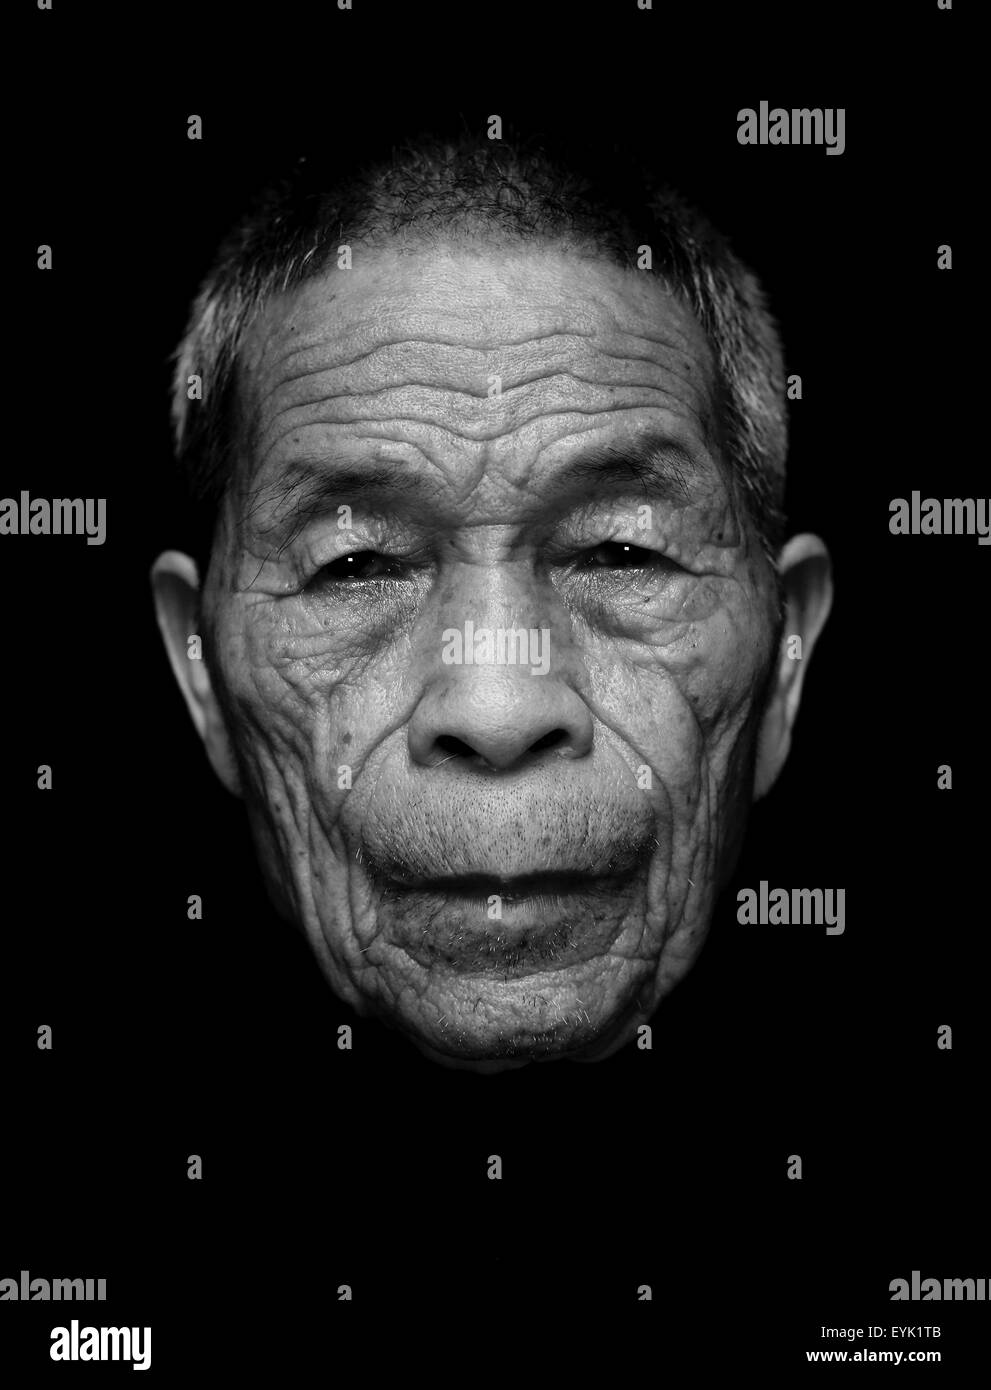 Chn. 22nd May, 2015. CHINA - May 22 2015: (EDITORIAL USE ONLY. CHINA OUT)(MINIMUM PRICE: 100 USD) Gan Yiaocai: Male, born in 1924 and now lives in Maoming Guangdong. He was caught for conscription when he was 21, sent to 62th Corp National Revolution Army, they marched to Nanning Guangxi day and night, carrying water with bamboo tubes, and they were asked to carring grains to sell in Jiangxi. After one week's fight with Japanese army in May in Nanning, then Japanese retreated to Hanoi, running and cutting down trees by the roads to block the chasing Chinese army . He accepted Hapan's disar Stock Photo